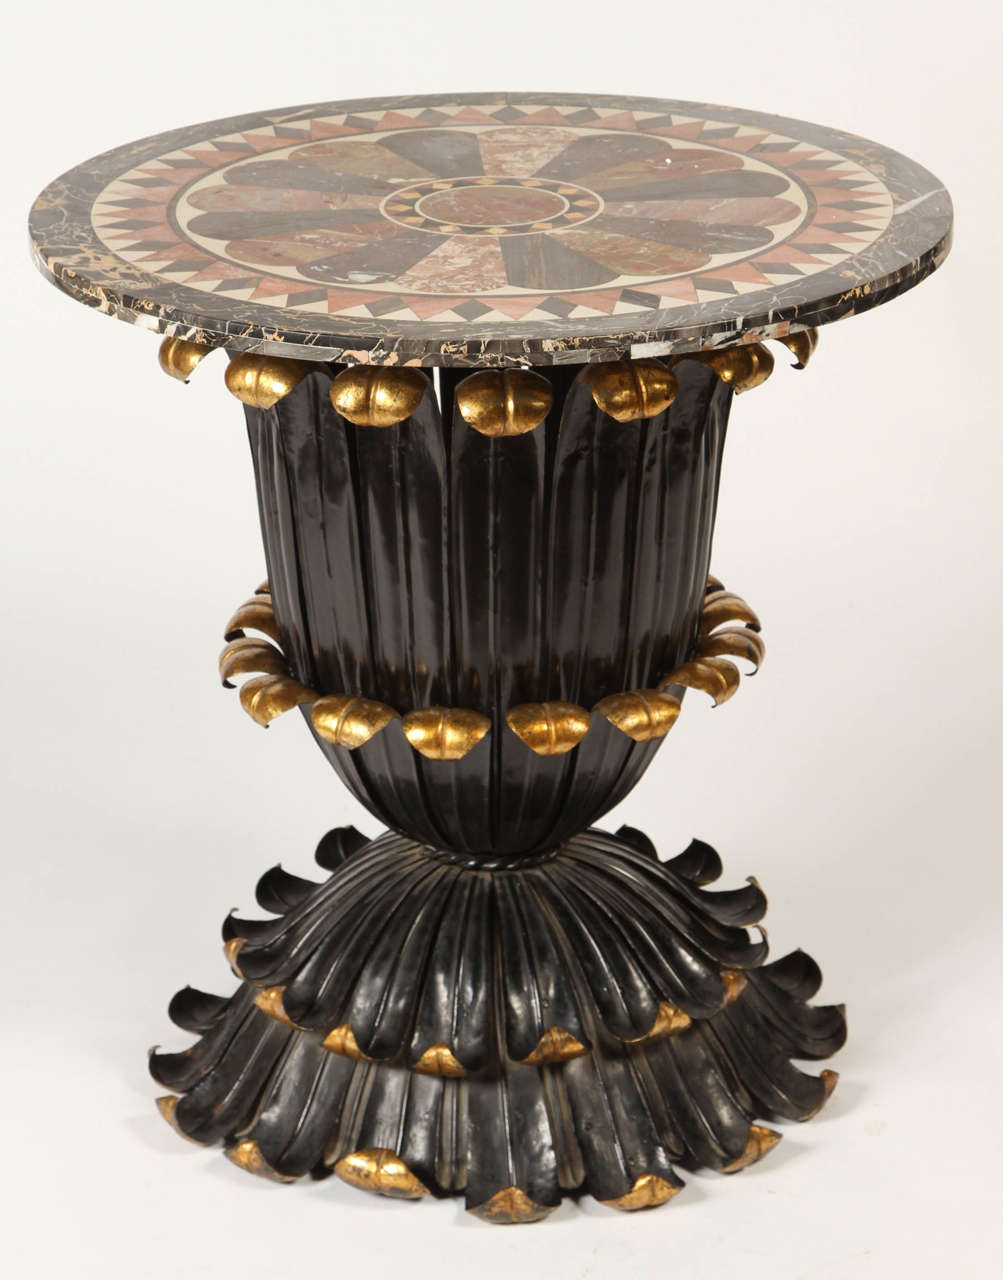 This stunning table from the late 19th century has a fantastic marble specimen top and a painted and gilt foliage-inspired base. The deep color palette contrasts wonderfully with the feminine organic silhouette. This table would be perfect for a